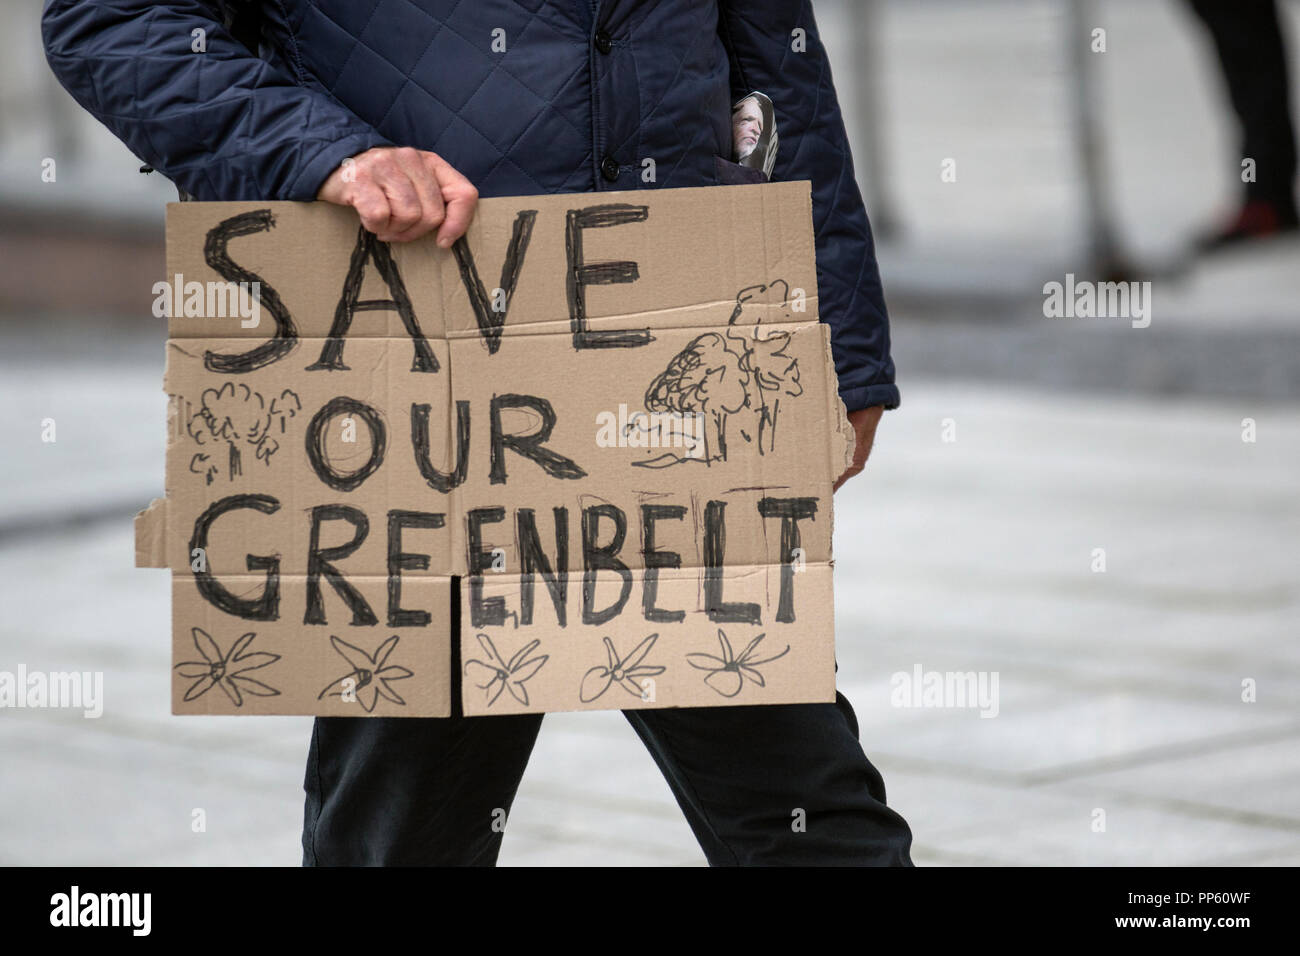 Save our greenbelt campaigner with cardboard sign at the Labour Party Conference, Liverpool, UK Stock Photo